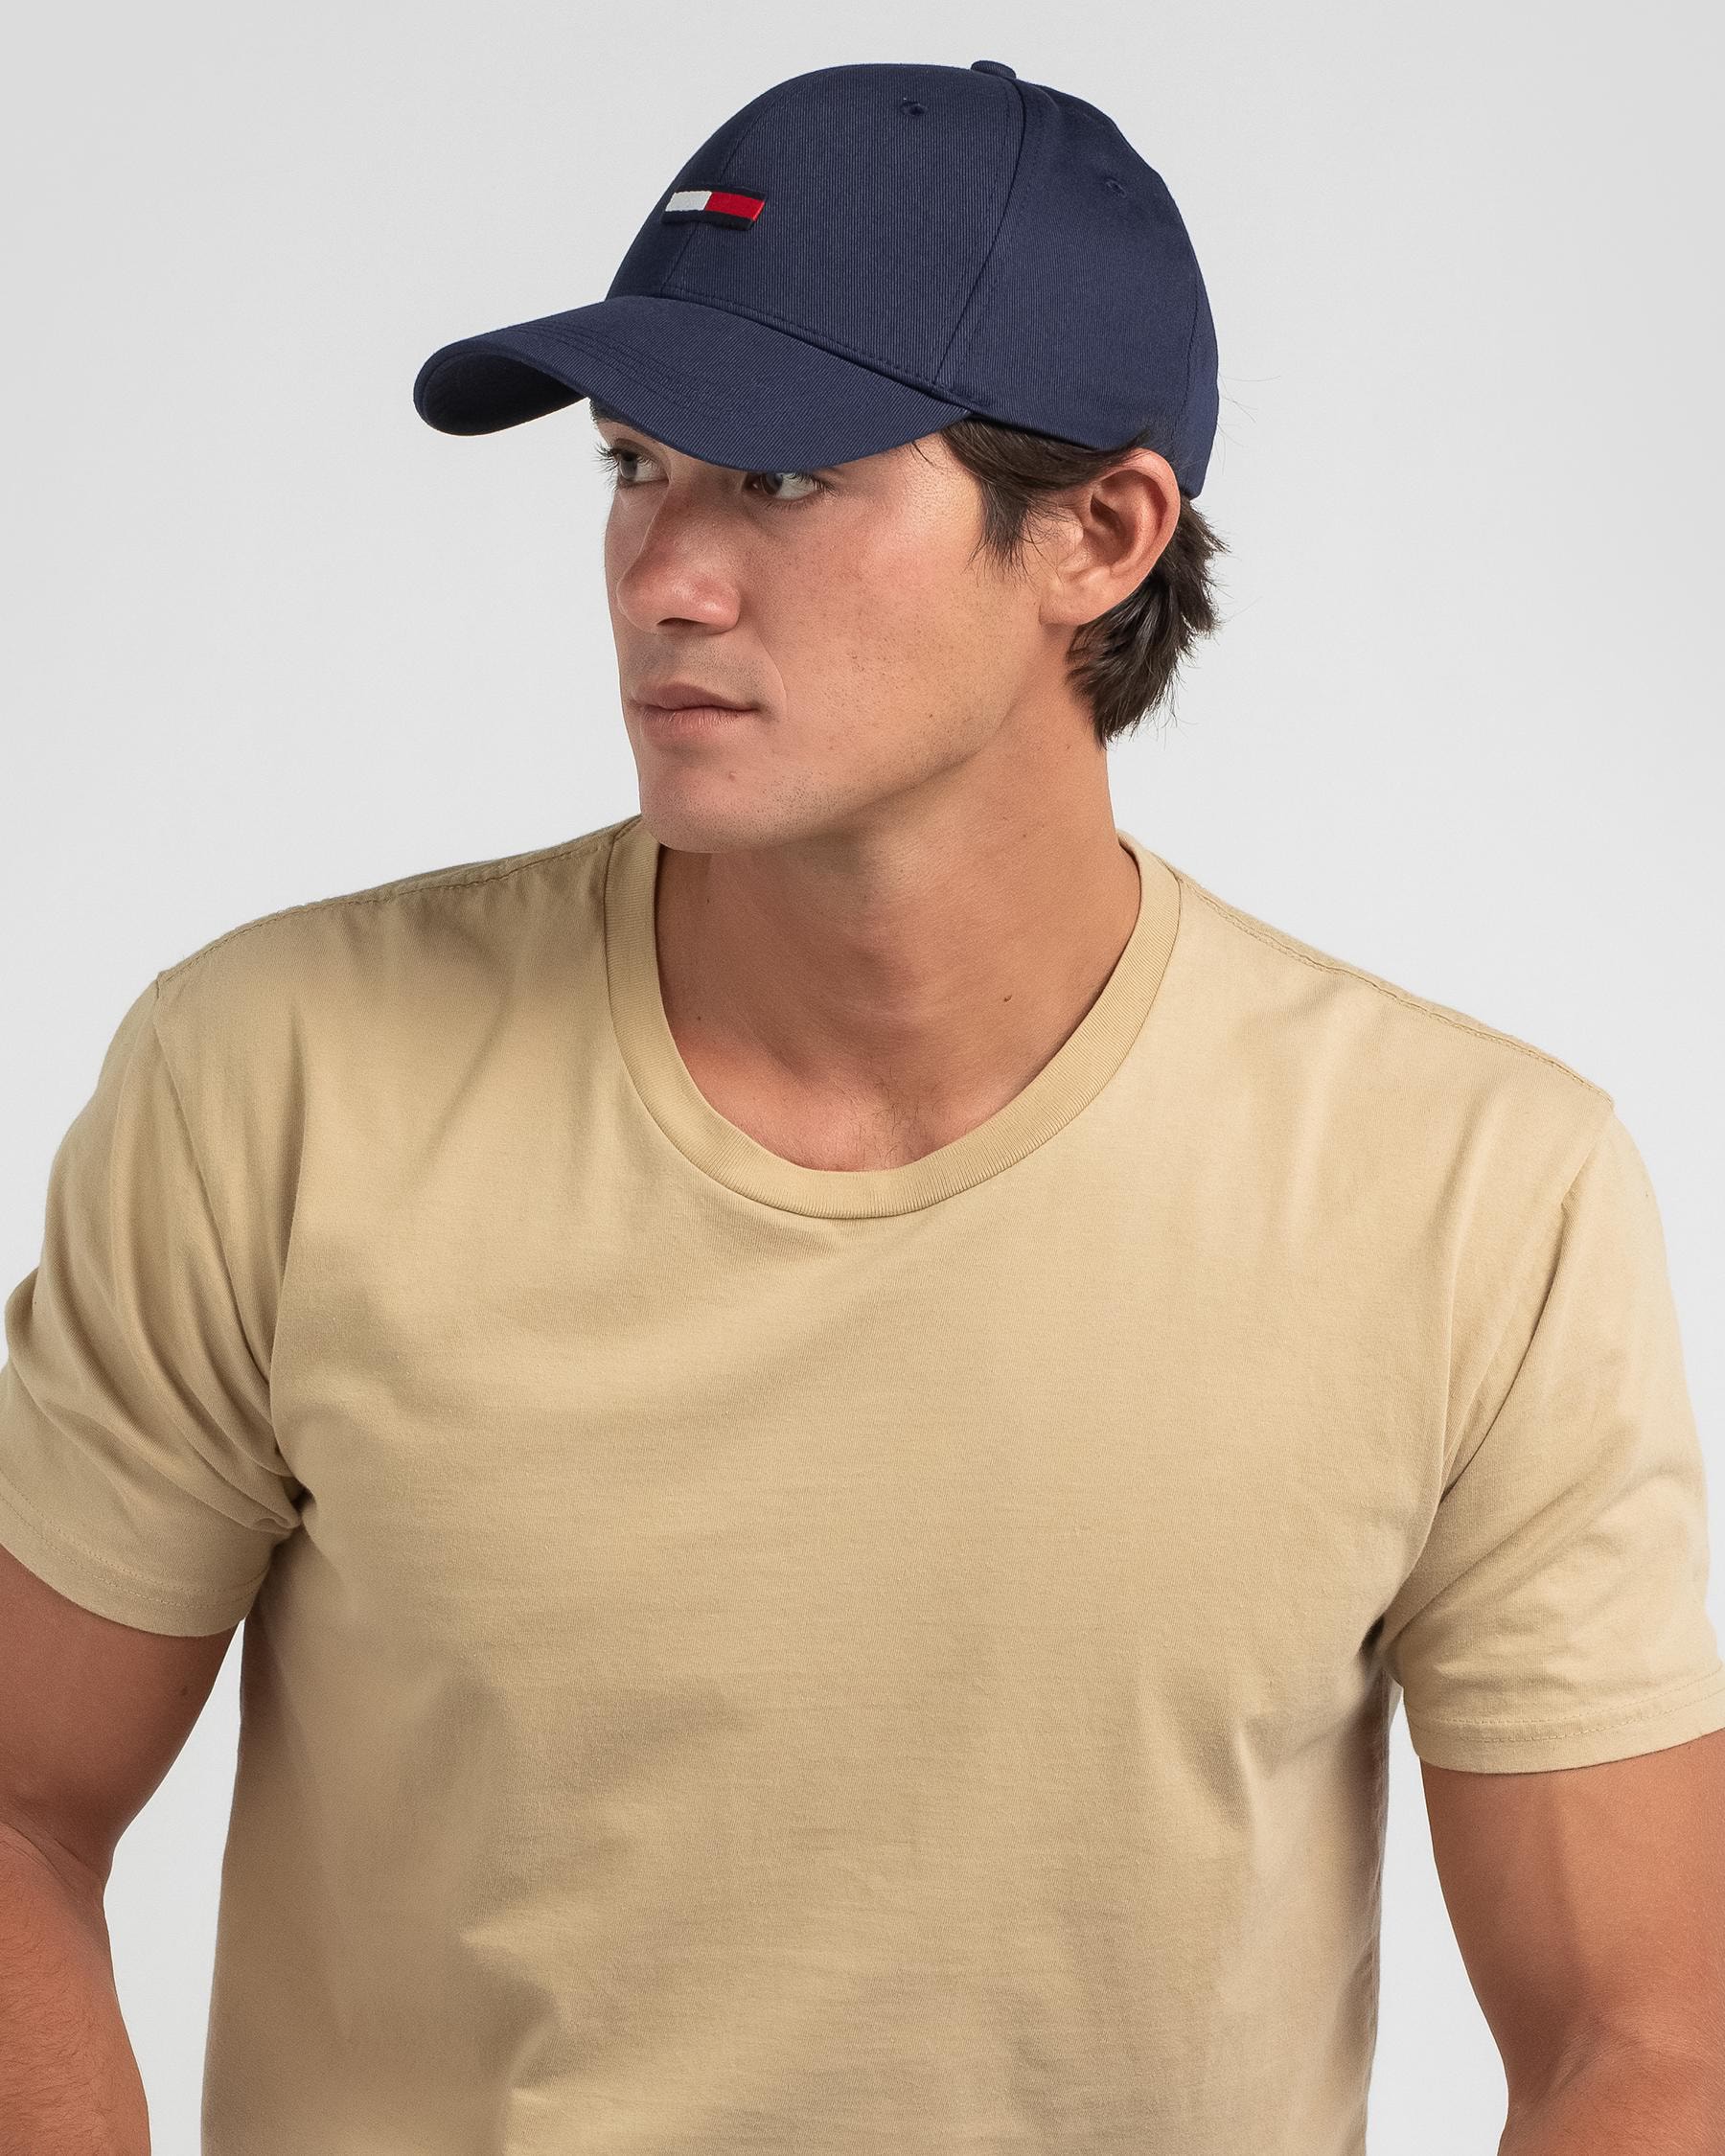 In Beach Easy United City Returns - Cap FREE* Hilfiger Twilight - Navy States Flag & TJM Tommy Shipping